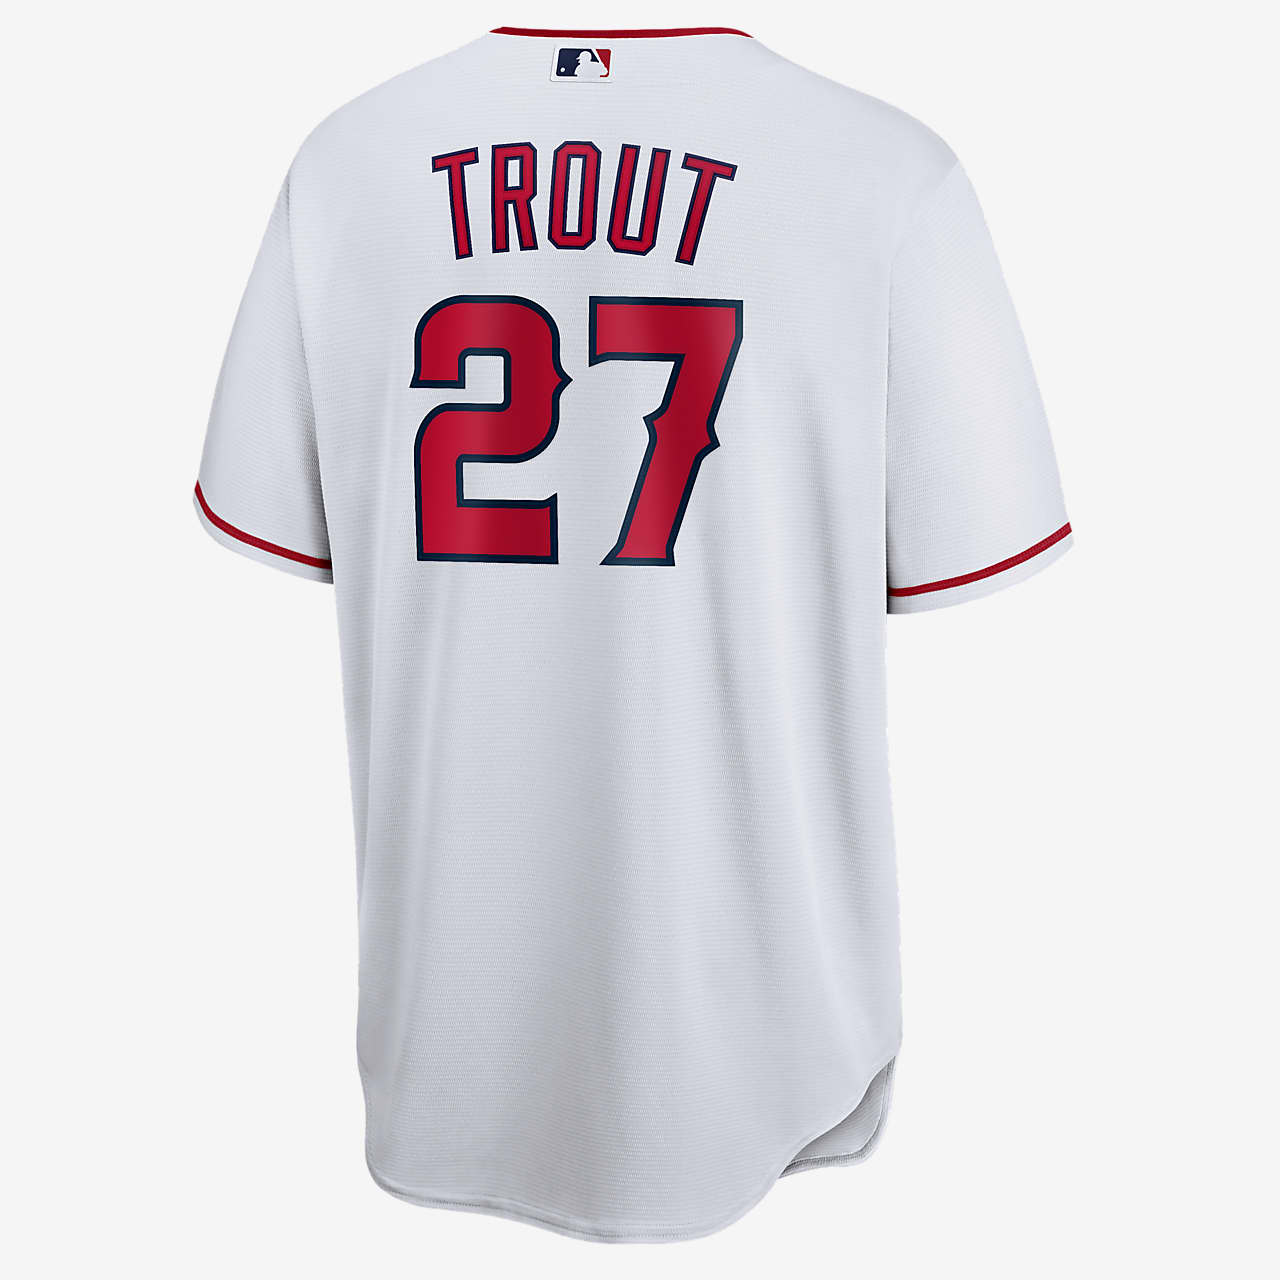 mike trout jersey amazon